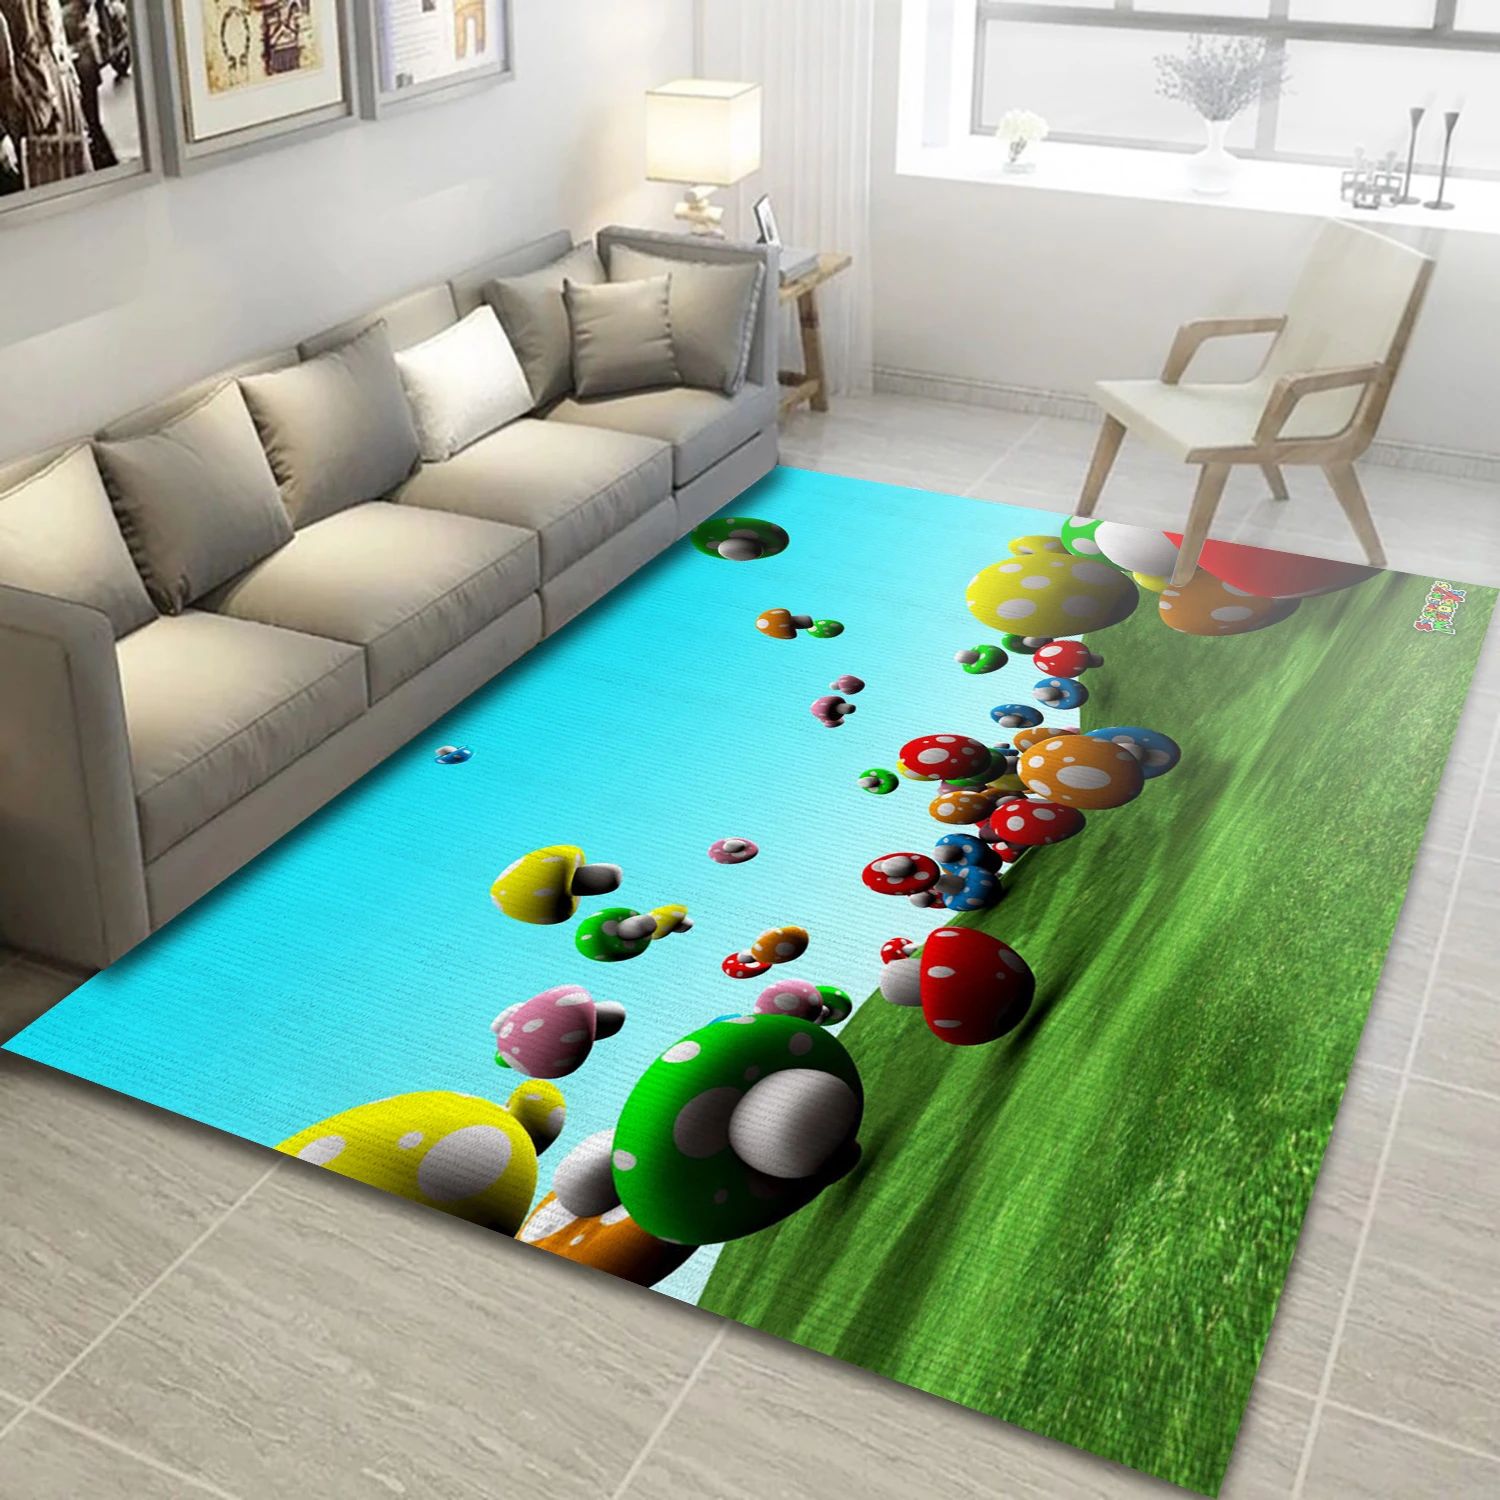 Mario Video Game Area Rug For Christmas, Bedroom Rug - Christmas Gift Decor - Indoor Outdoor Rugs